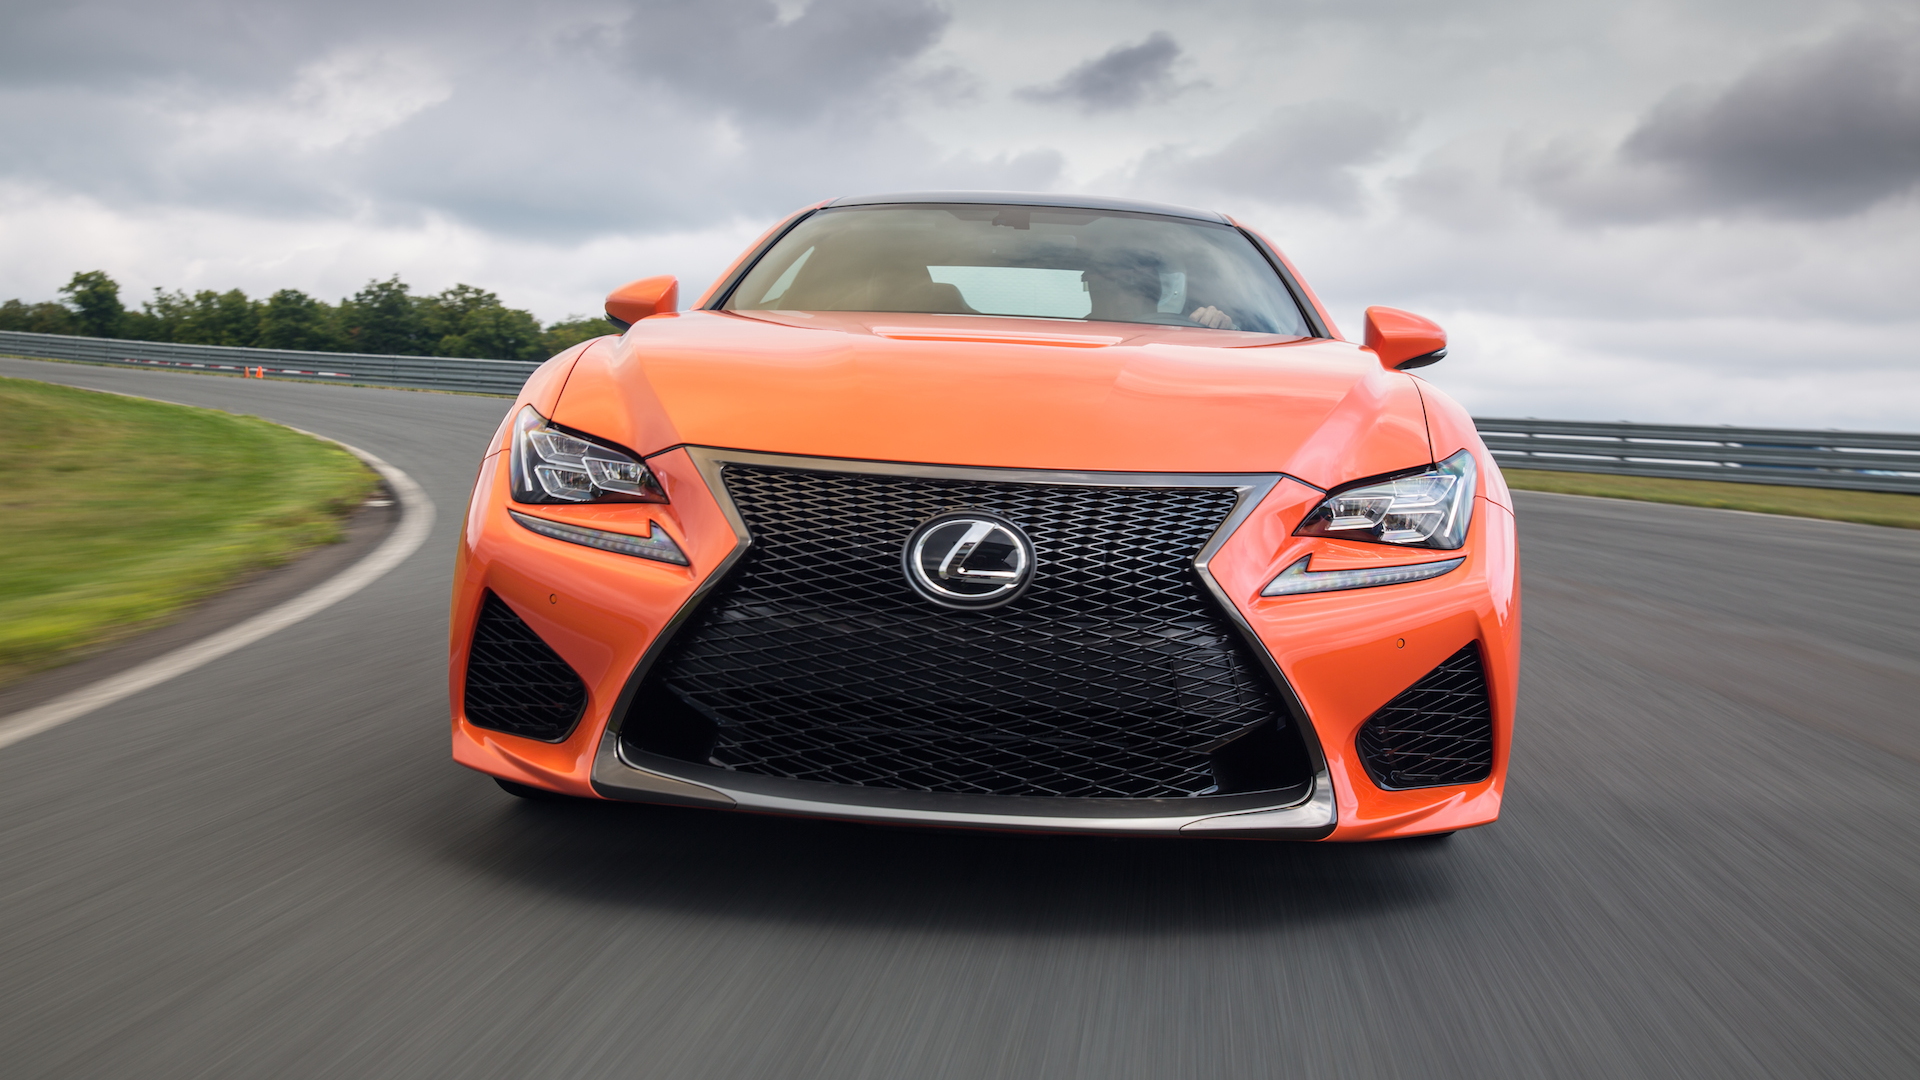 2015 Lexus Rc F First Drive Review